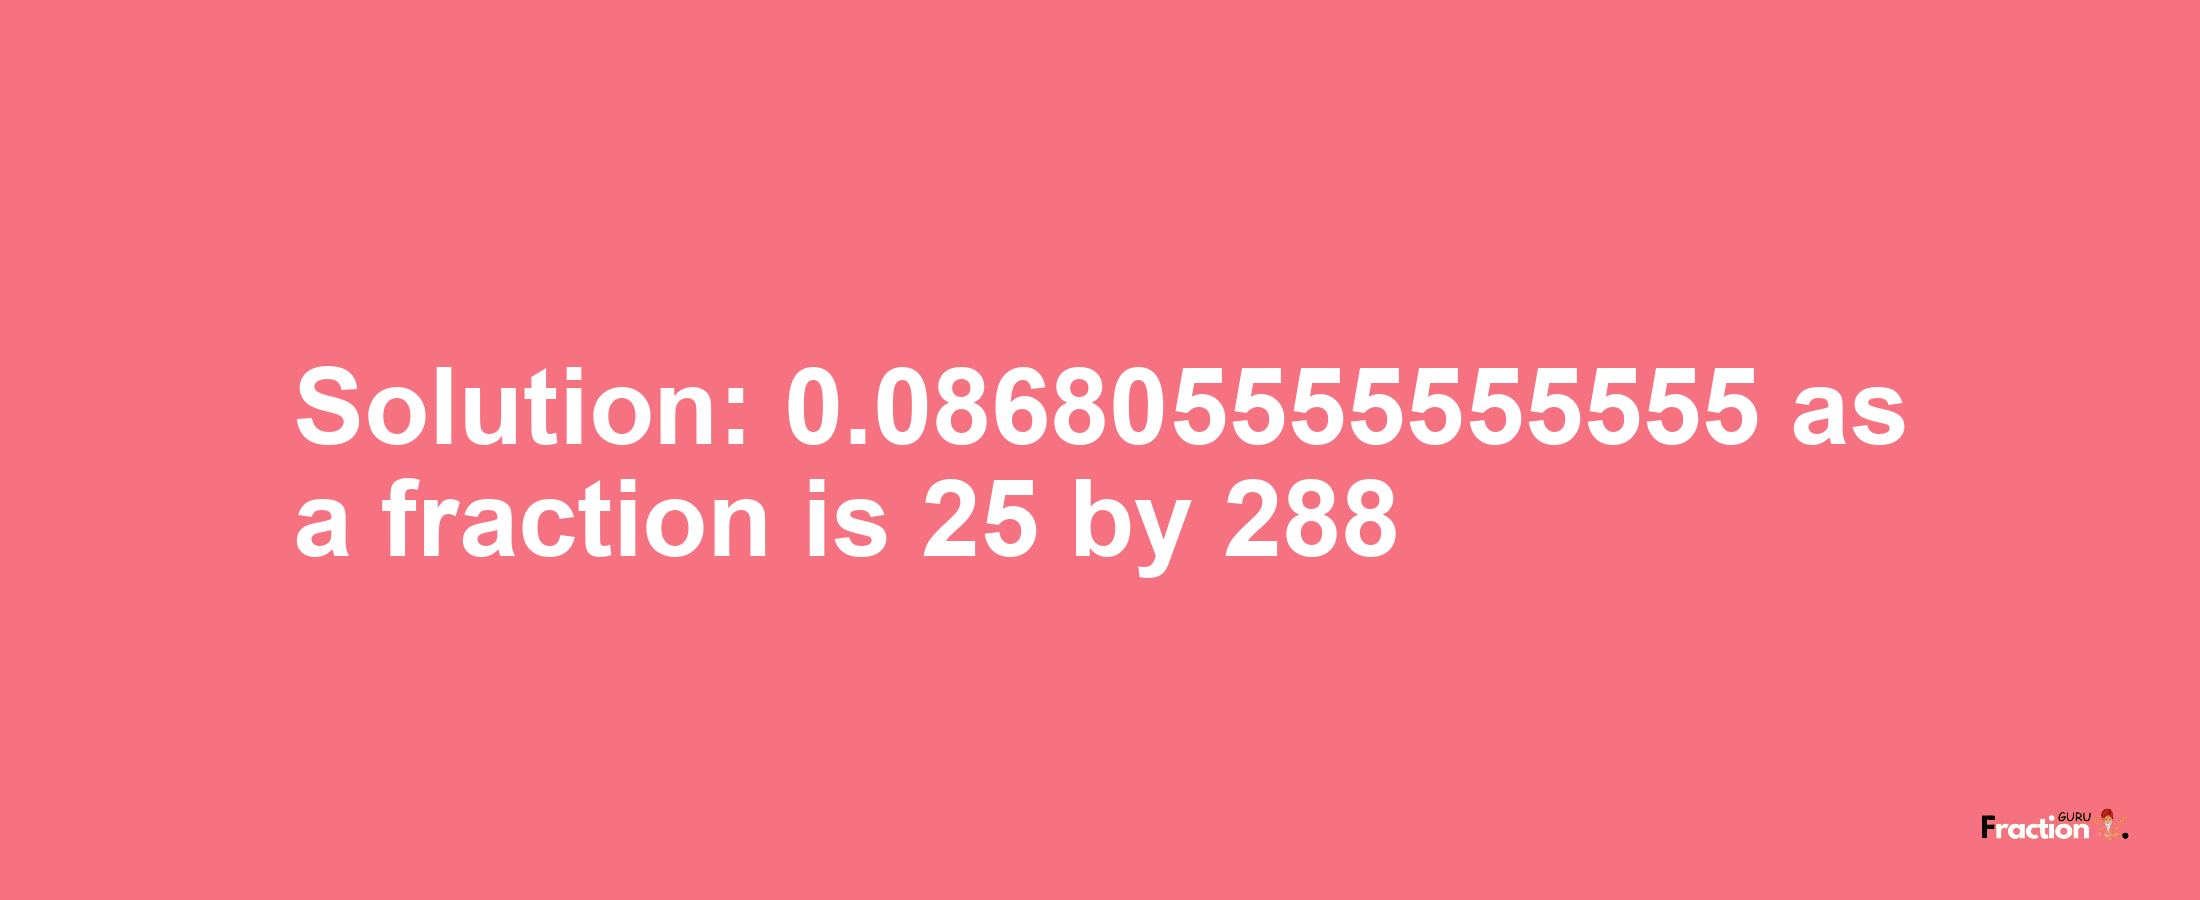 Solution:0.086805555555555 as a fraction is 25/288